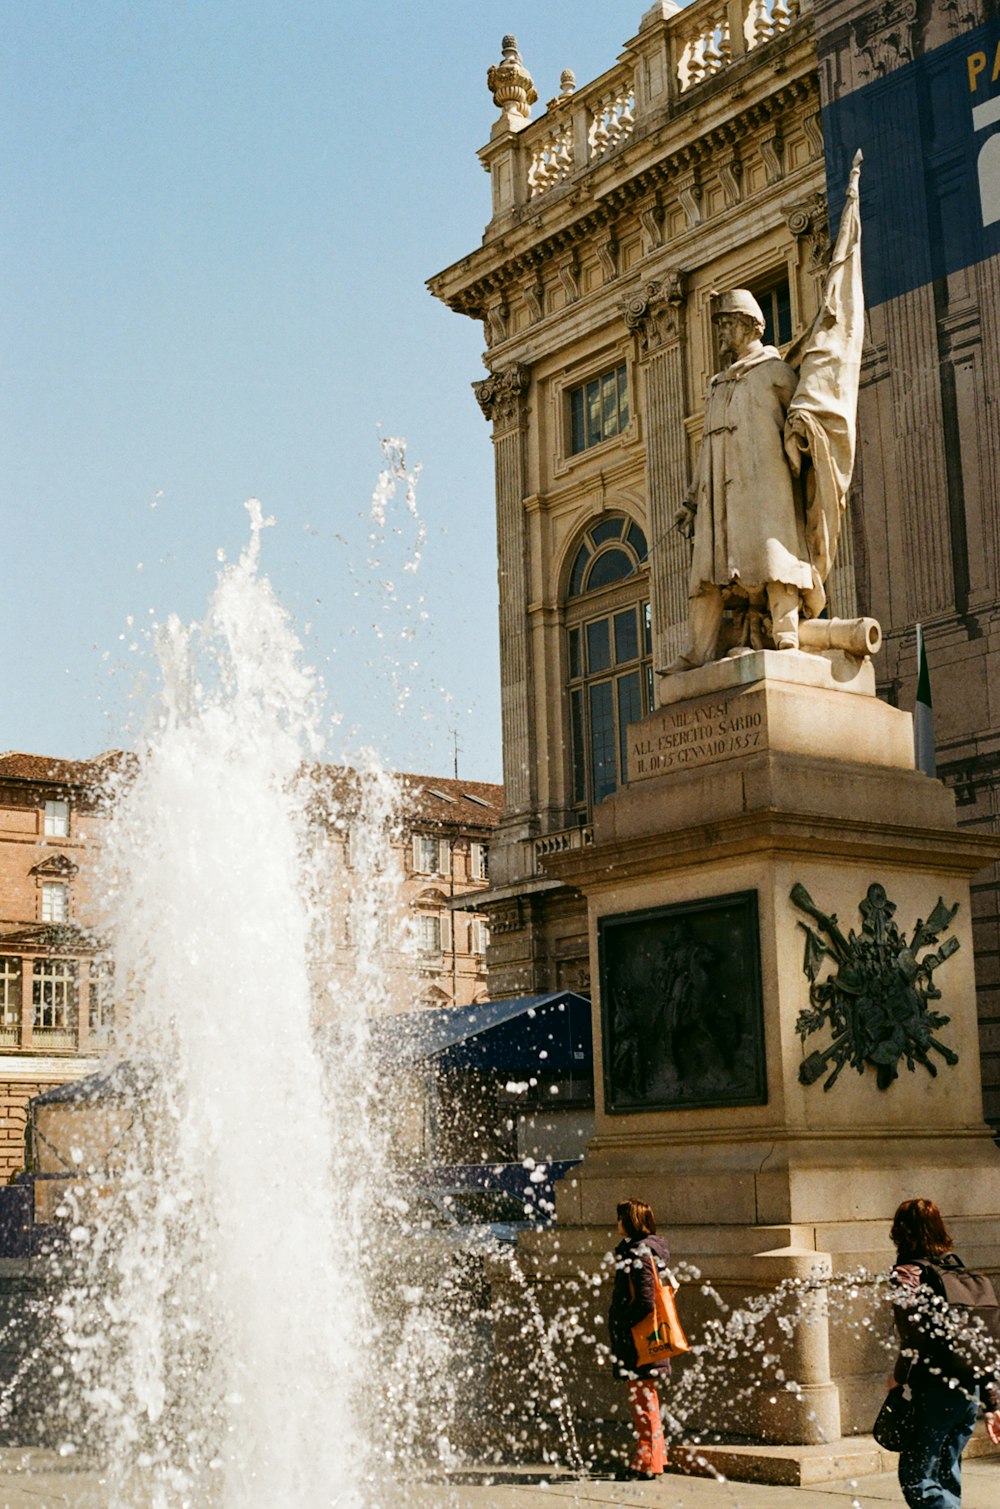 a fountain with water shooting out of it in front of a building